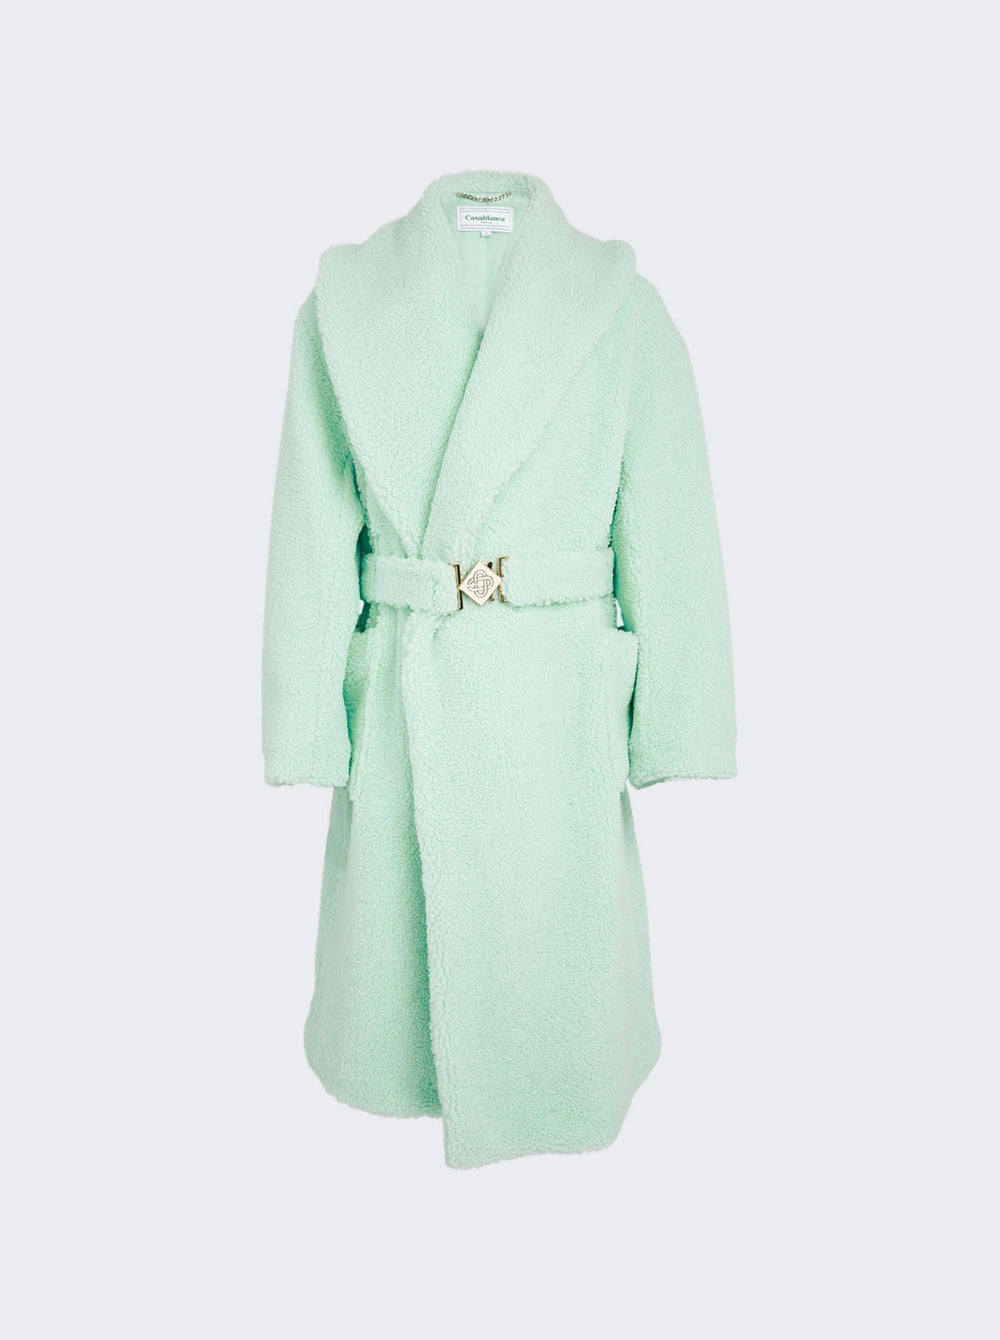 CASABLANCA RECYCLED POLYESTER SHEARLING ROBE COAT